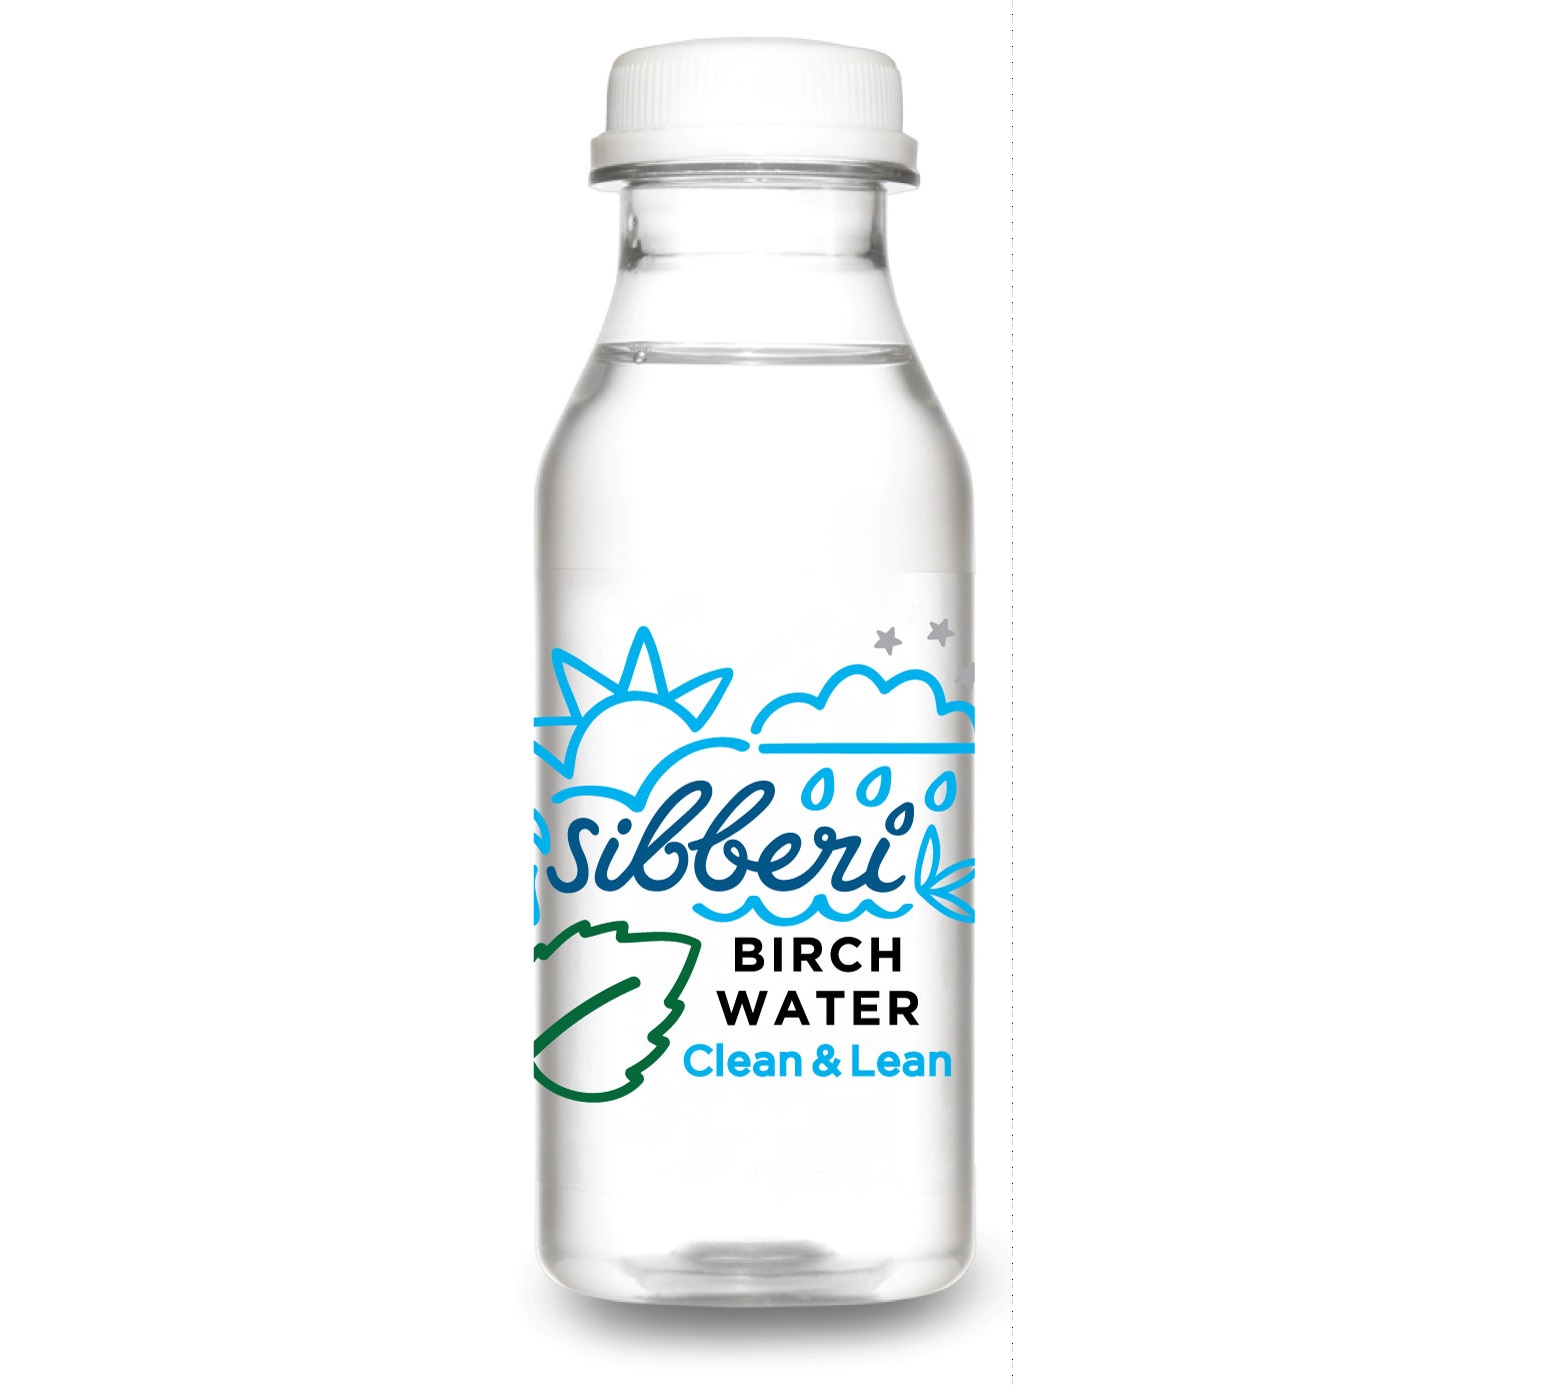 How Birch Water Companies are Using Design to Battle for Market Share -  MOLD :: Designing the Future of Food